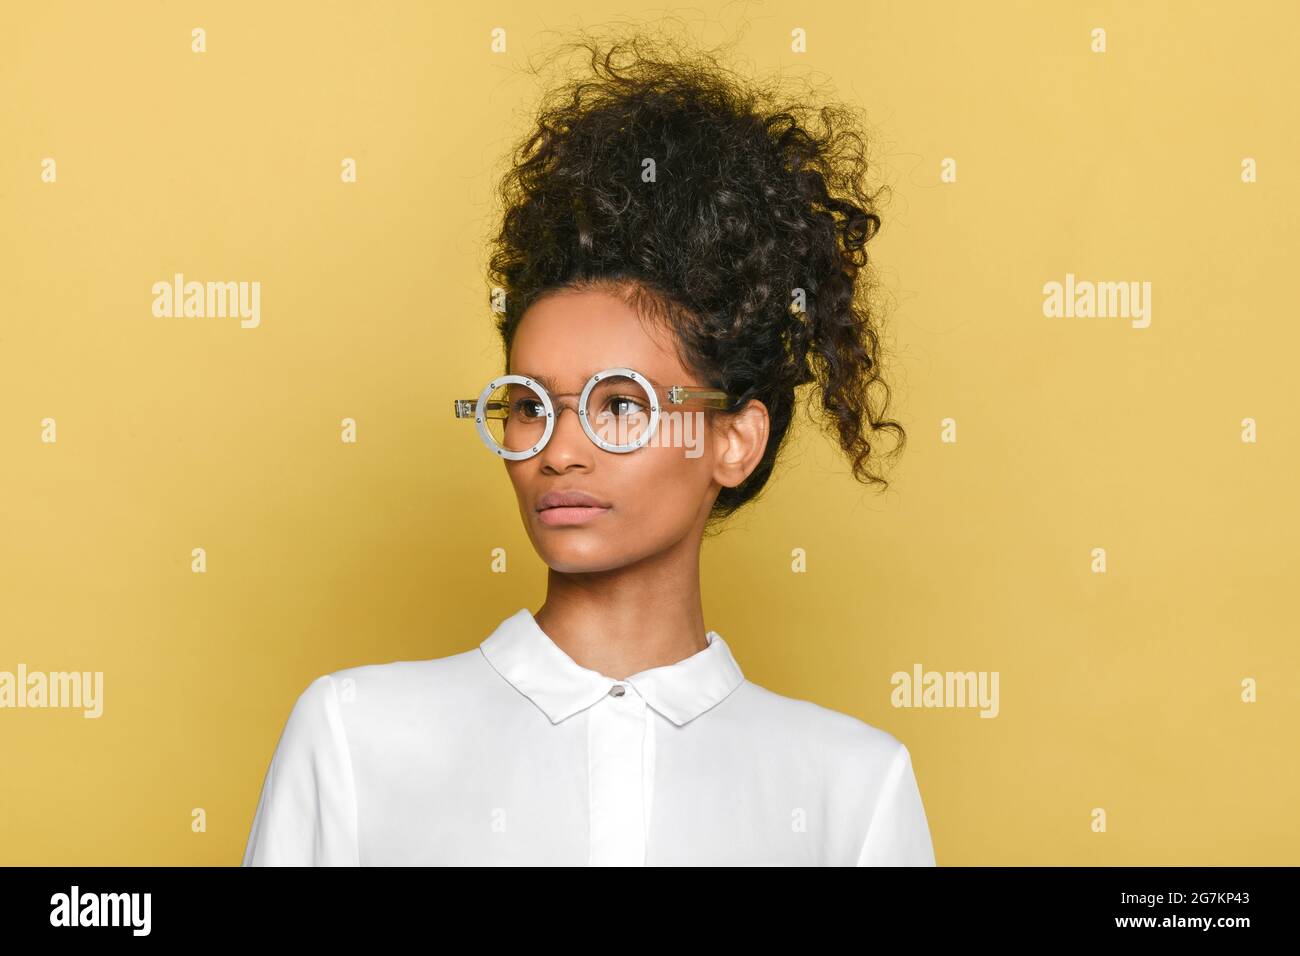 Trendy black girl in stylish retro round glasses with her long curly hair piled up on her head looking to the side over a yellow background Stock Photo